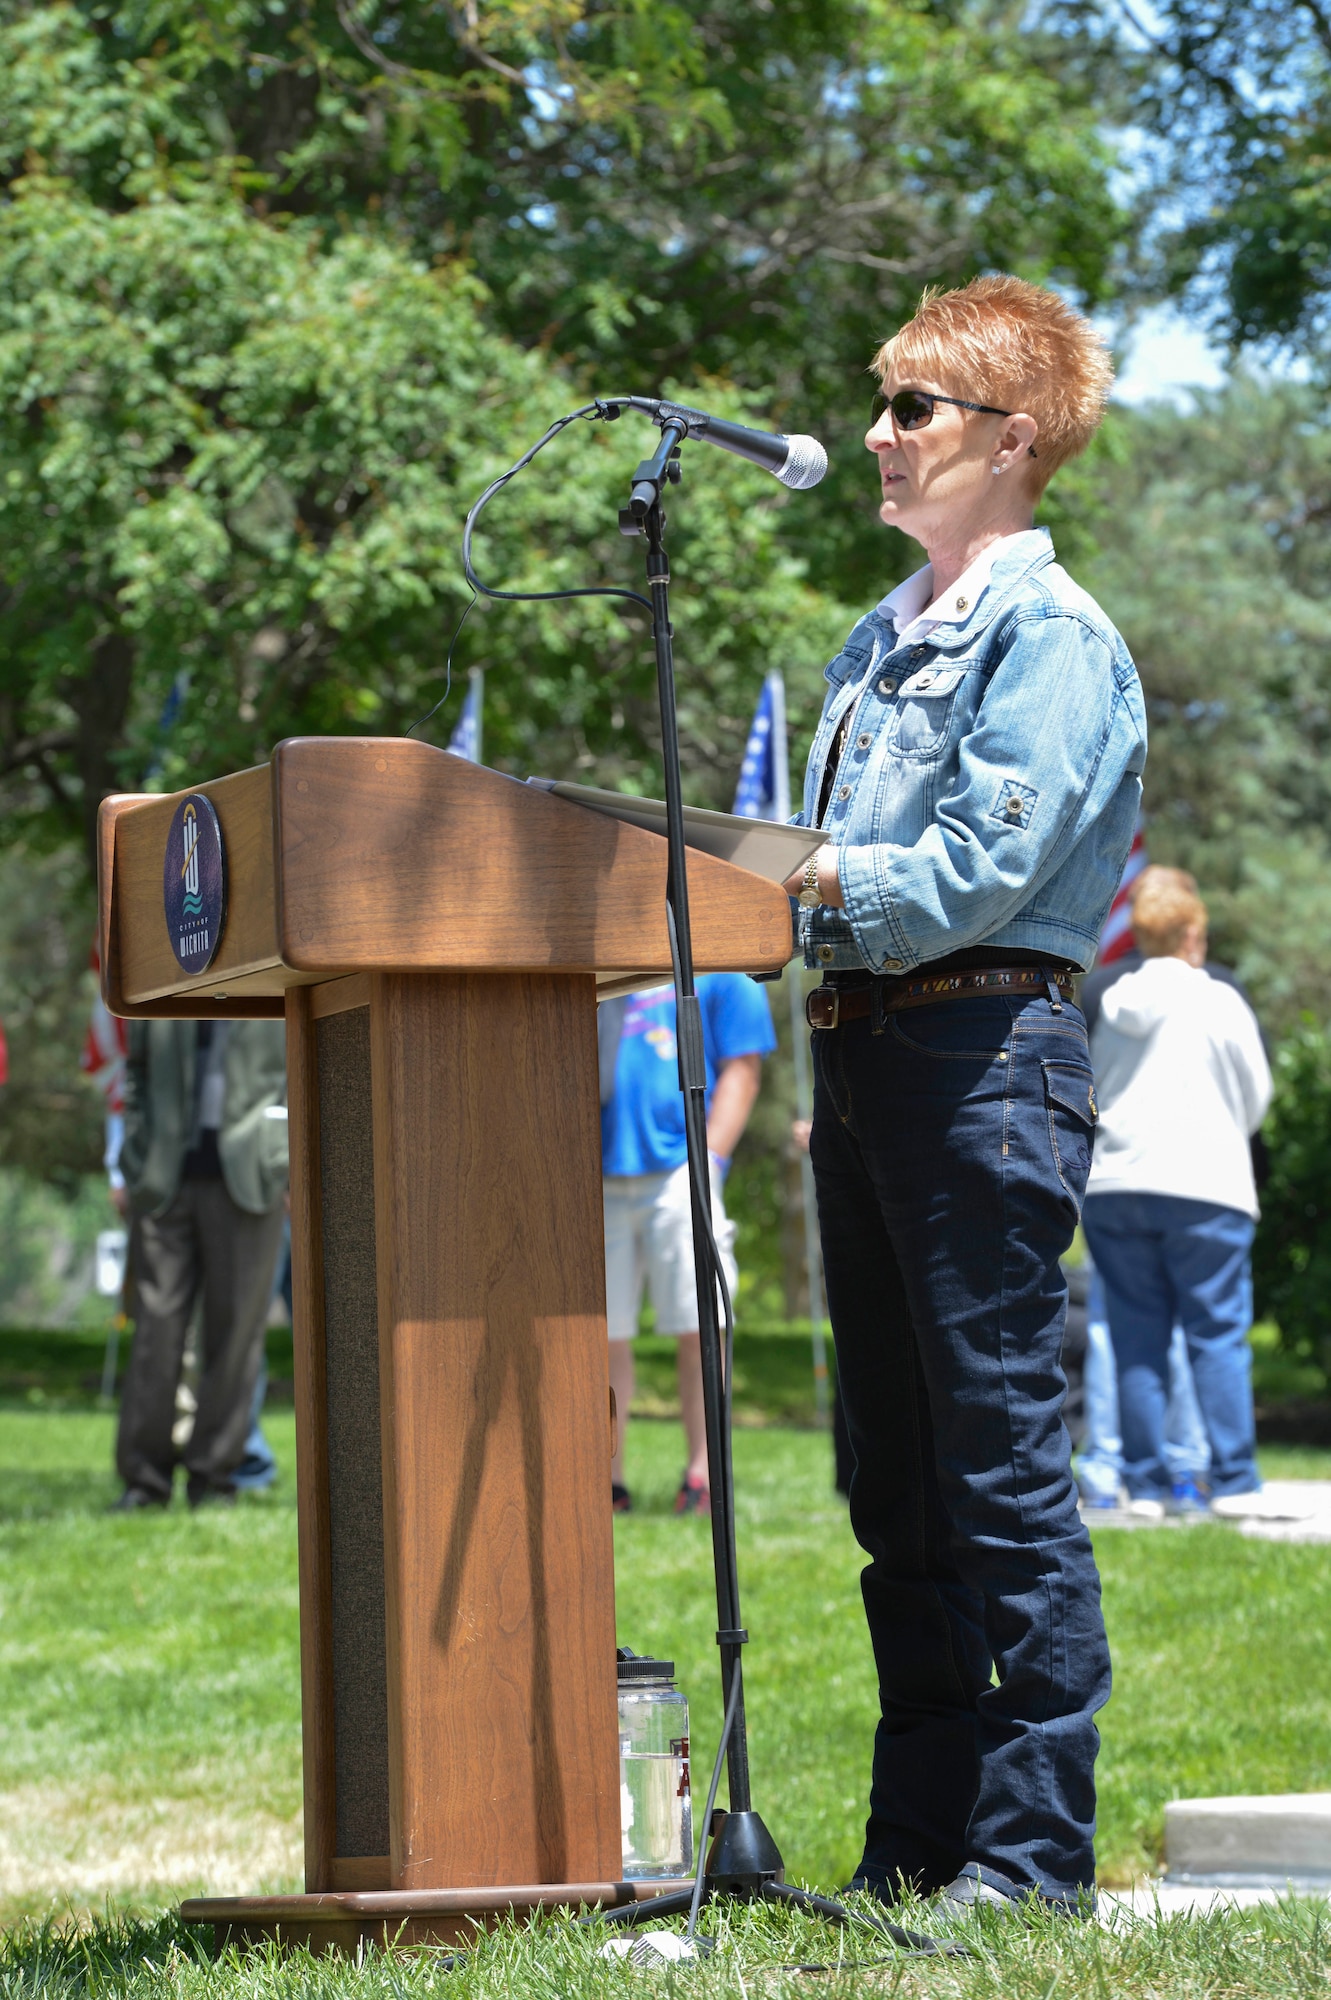 Anita Dixson, a Kansas Gold Star mother and president of the Operation Freedom Memorial Foundation, Inc., addresses audience members attending the new Operation Freedom Memorial, during a dedication ceremony, May, 17, 2014, in Wichita, Kansas. She started the foundation after losing her son, U.S. Army Sgt. Evan Parker who died in 2005 from wounds suffered while deployed in Iraq. (U.S. Air Force photo/Staff Sgt. Jess Lockoski)